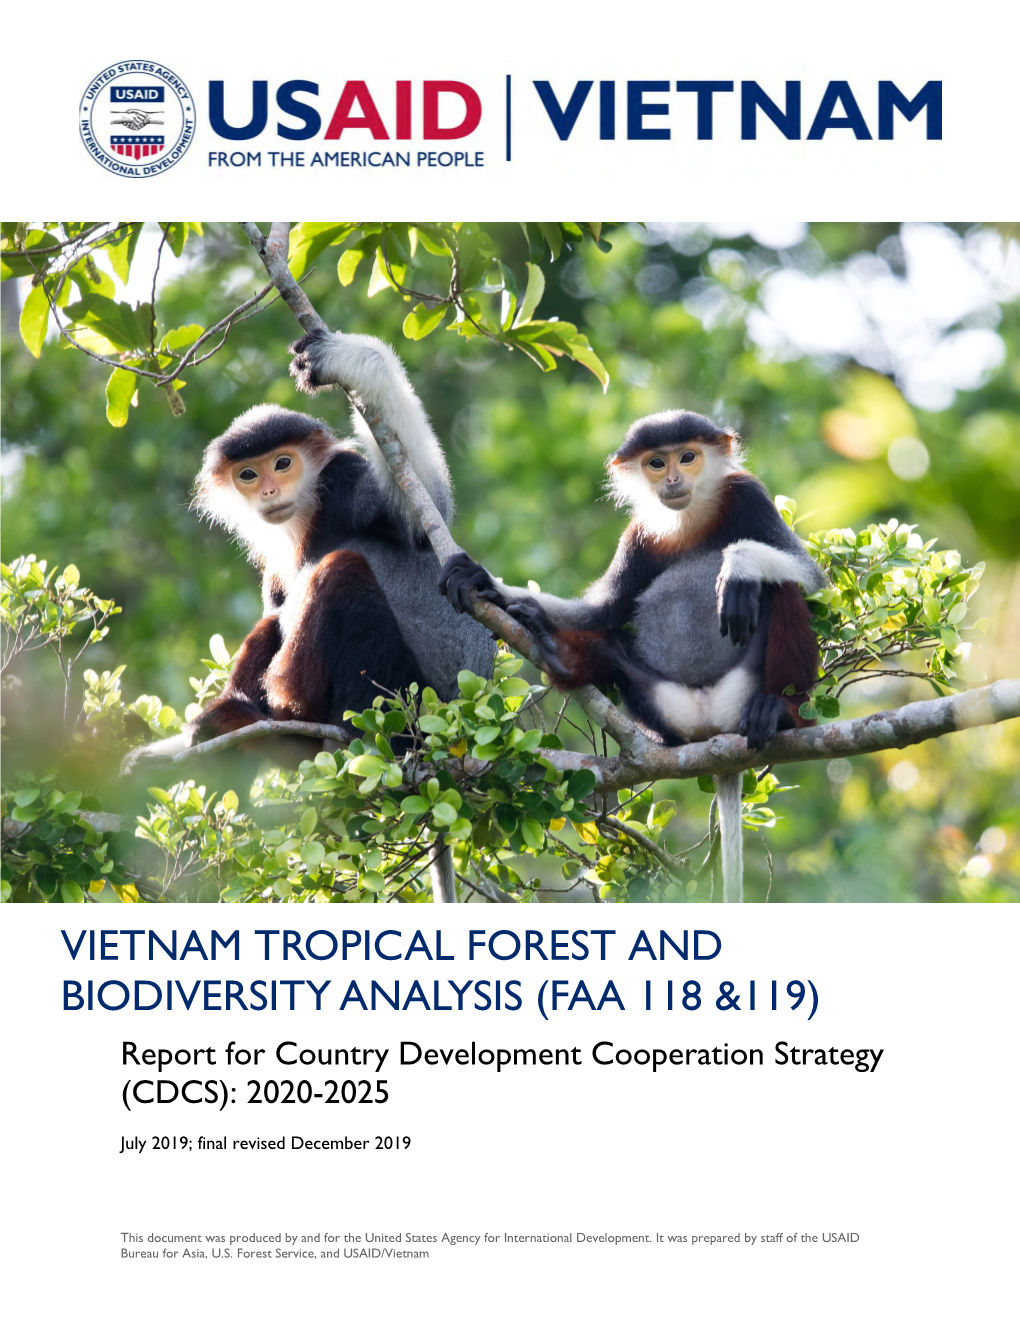 VIETNAM TROPICAL FOREST and BIODIVERSITY ANALYSIS (FAA 118 &119) Report for Country Development Cooperation Strategy (CDCS): 2020-2025